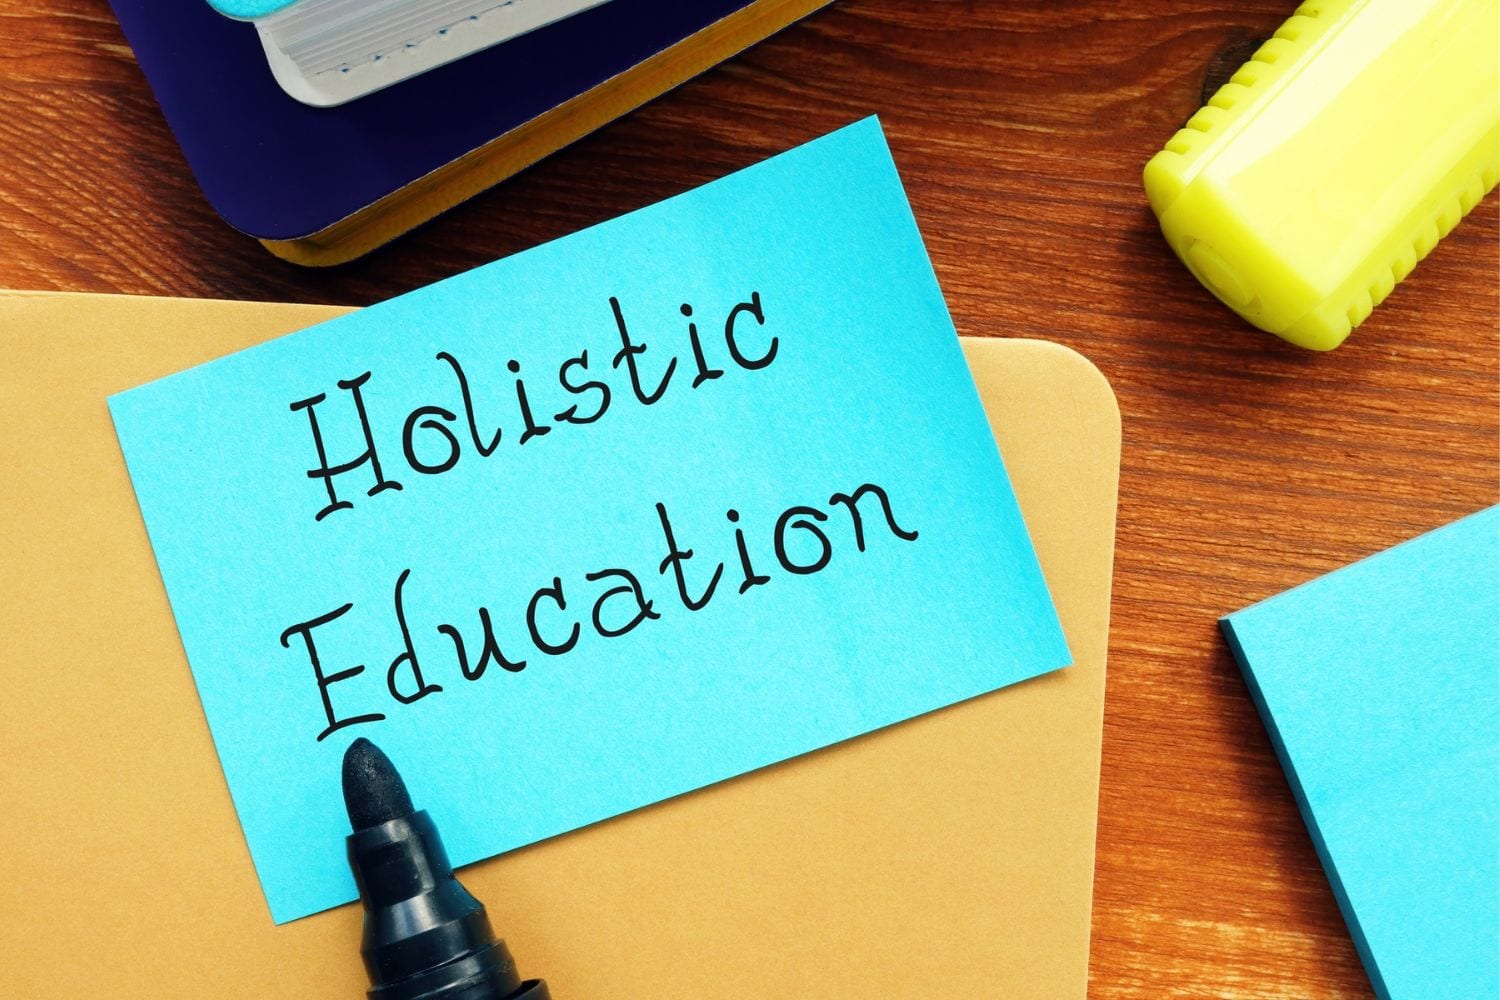 How Holistic Education Builds Resilience in Children